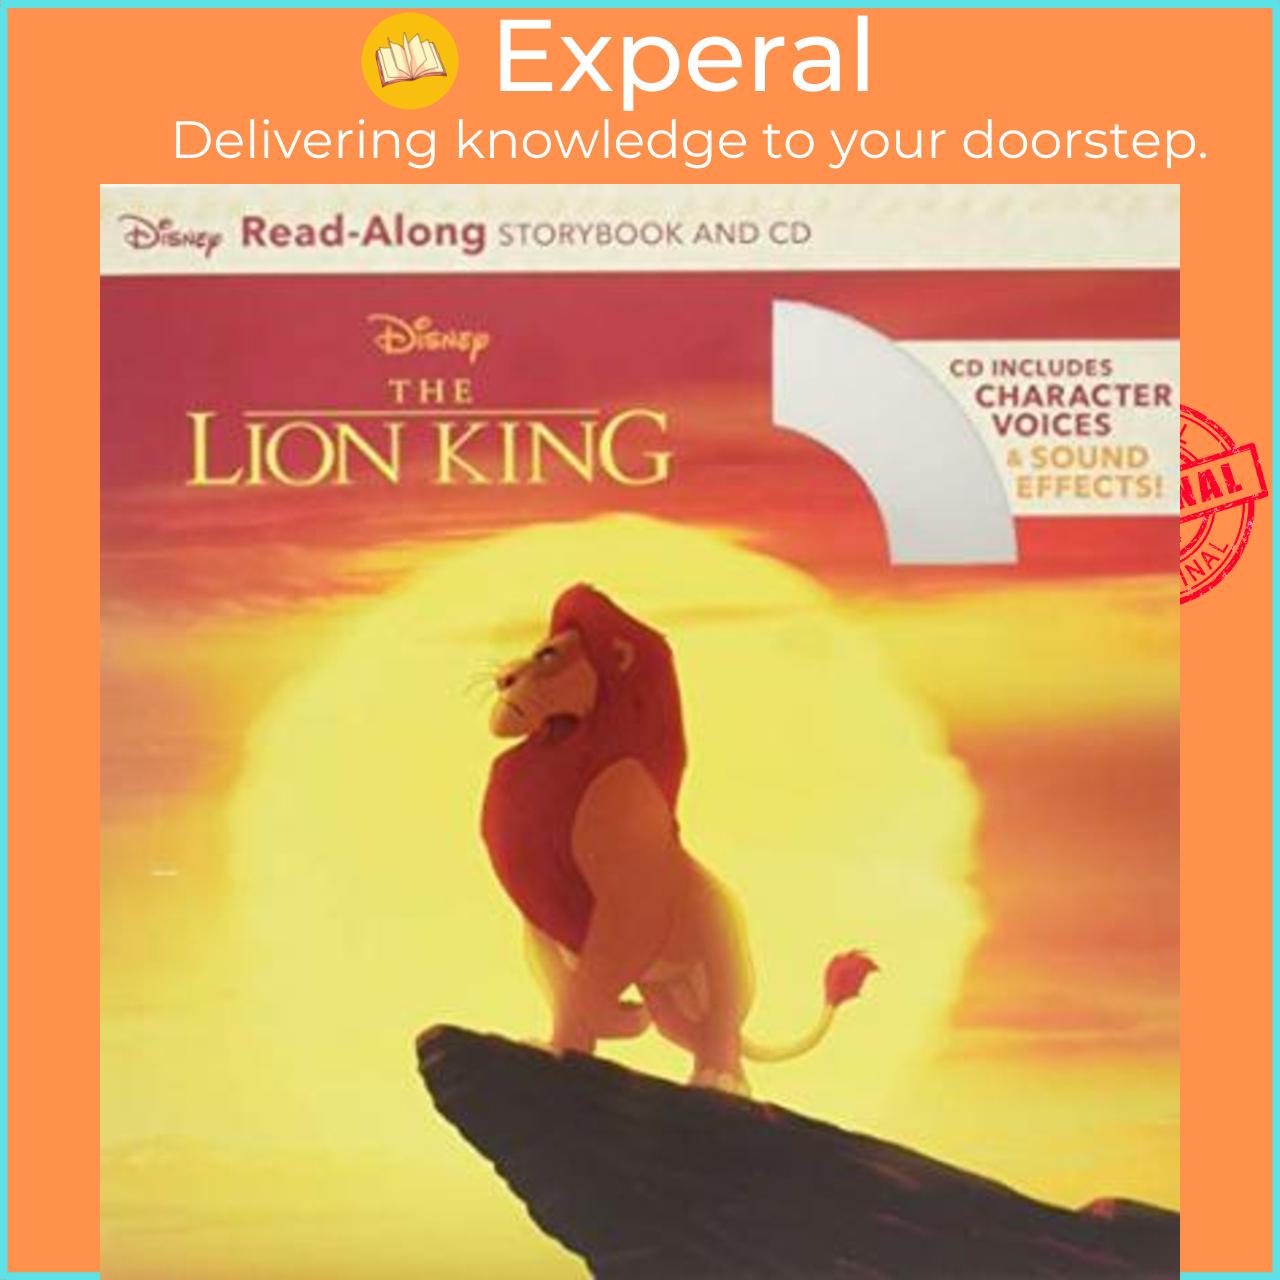 Sách - The Lion King Read-Along Storybook by Disney Books Disney Storybook Art Team (US edition, paperback)